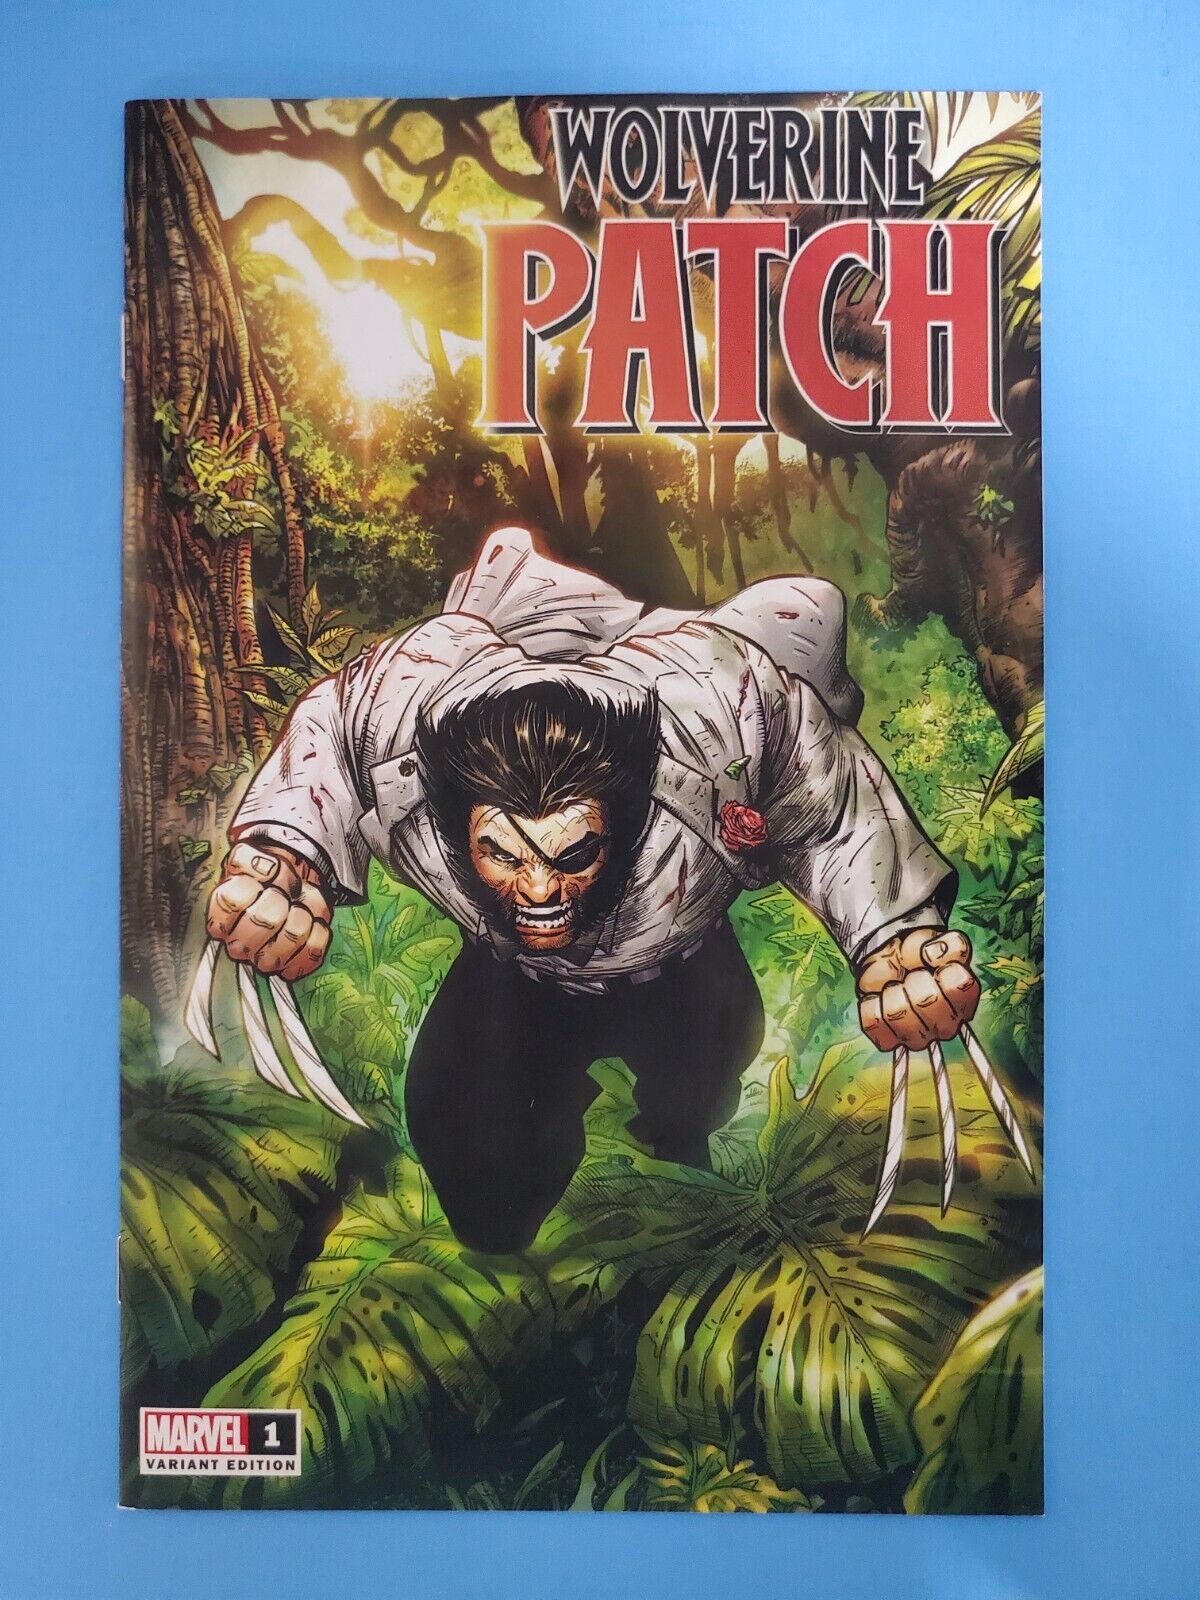 WOLVERINE PATCH #1 WALMART VARIANT (2022) NM/NM+ NO COVER UPC CODE